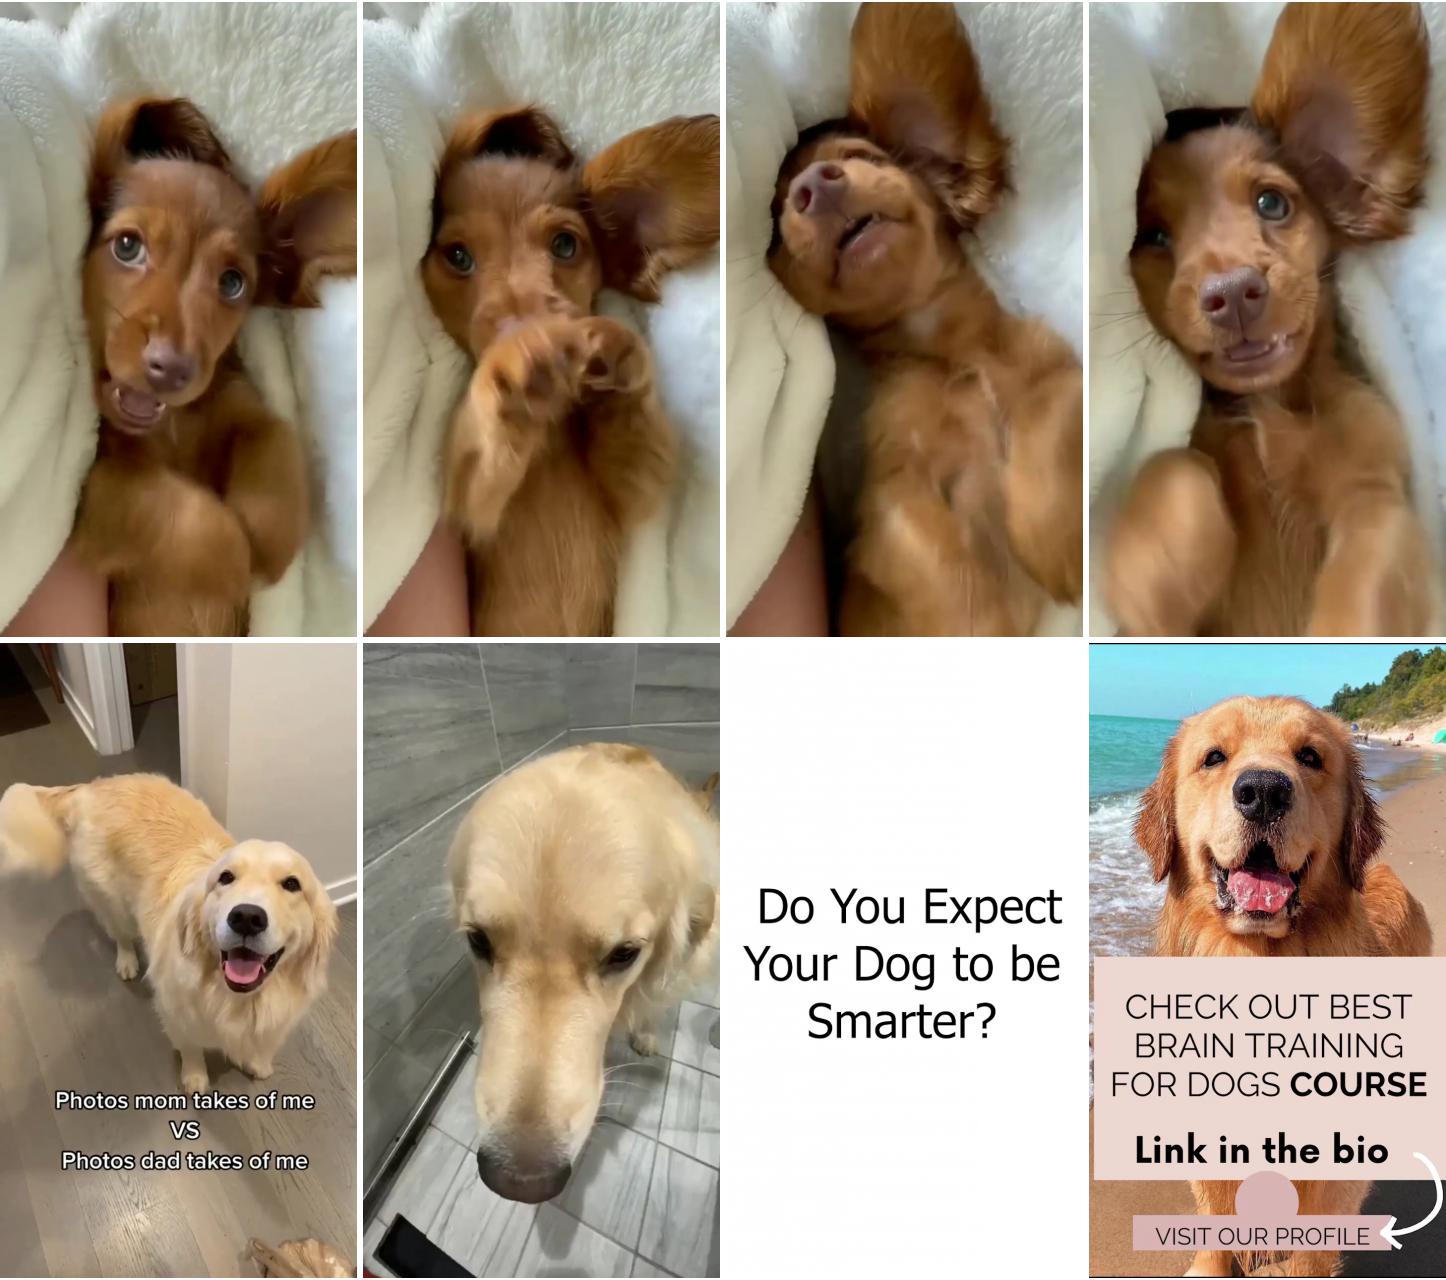 Cute puppy; photos mom takes of me vs photos dad takes of me - cute dogs - golden retriever - dog training tips